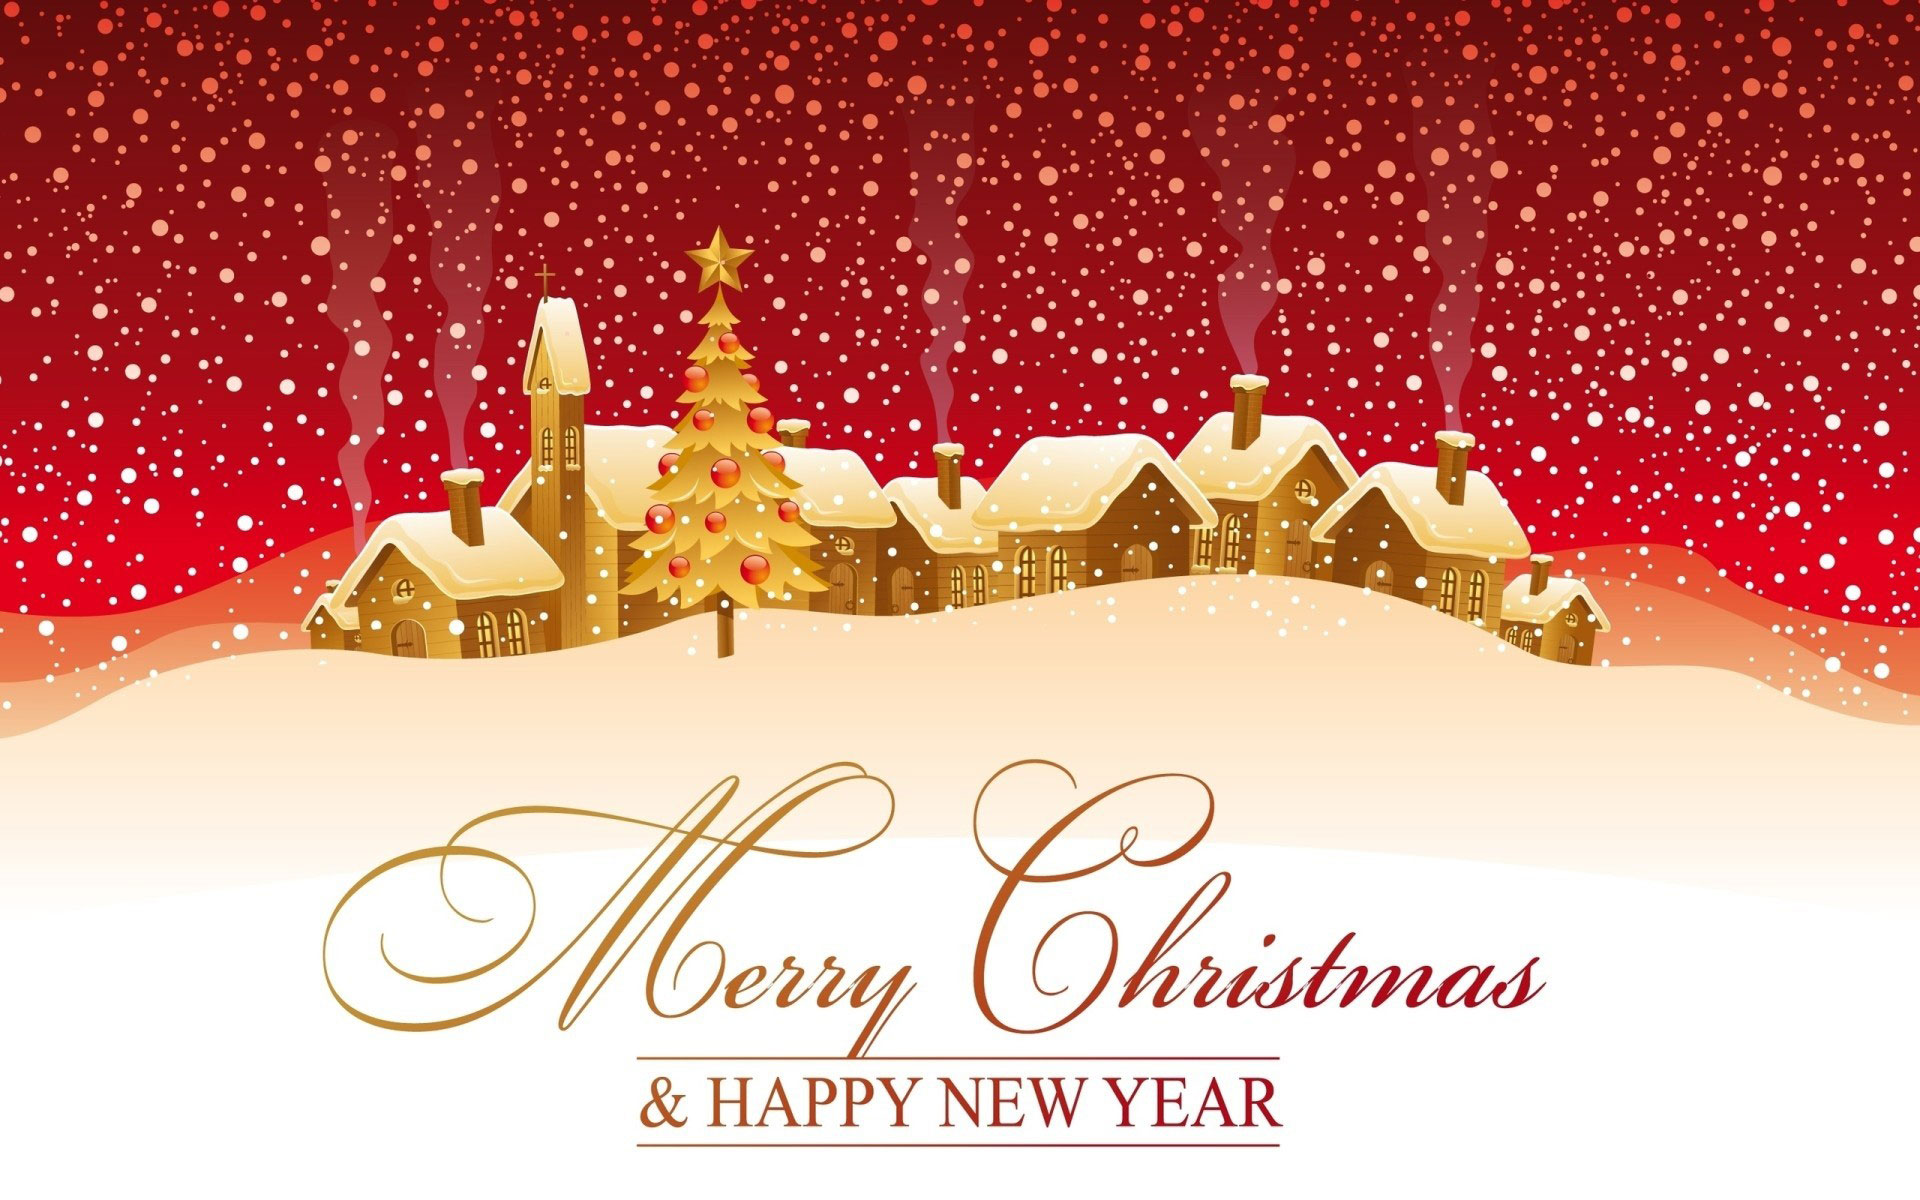 2015-Christmas-greetings-and-wishes.jpg